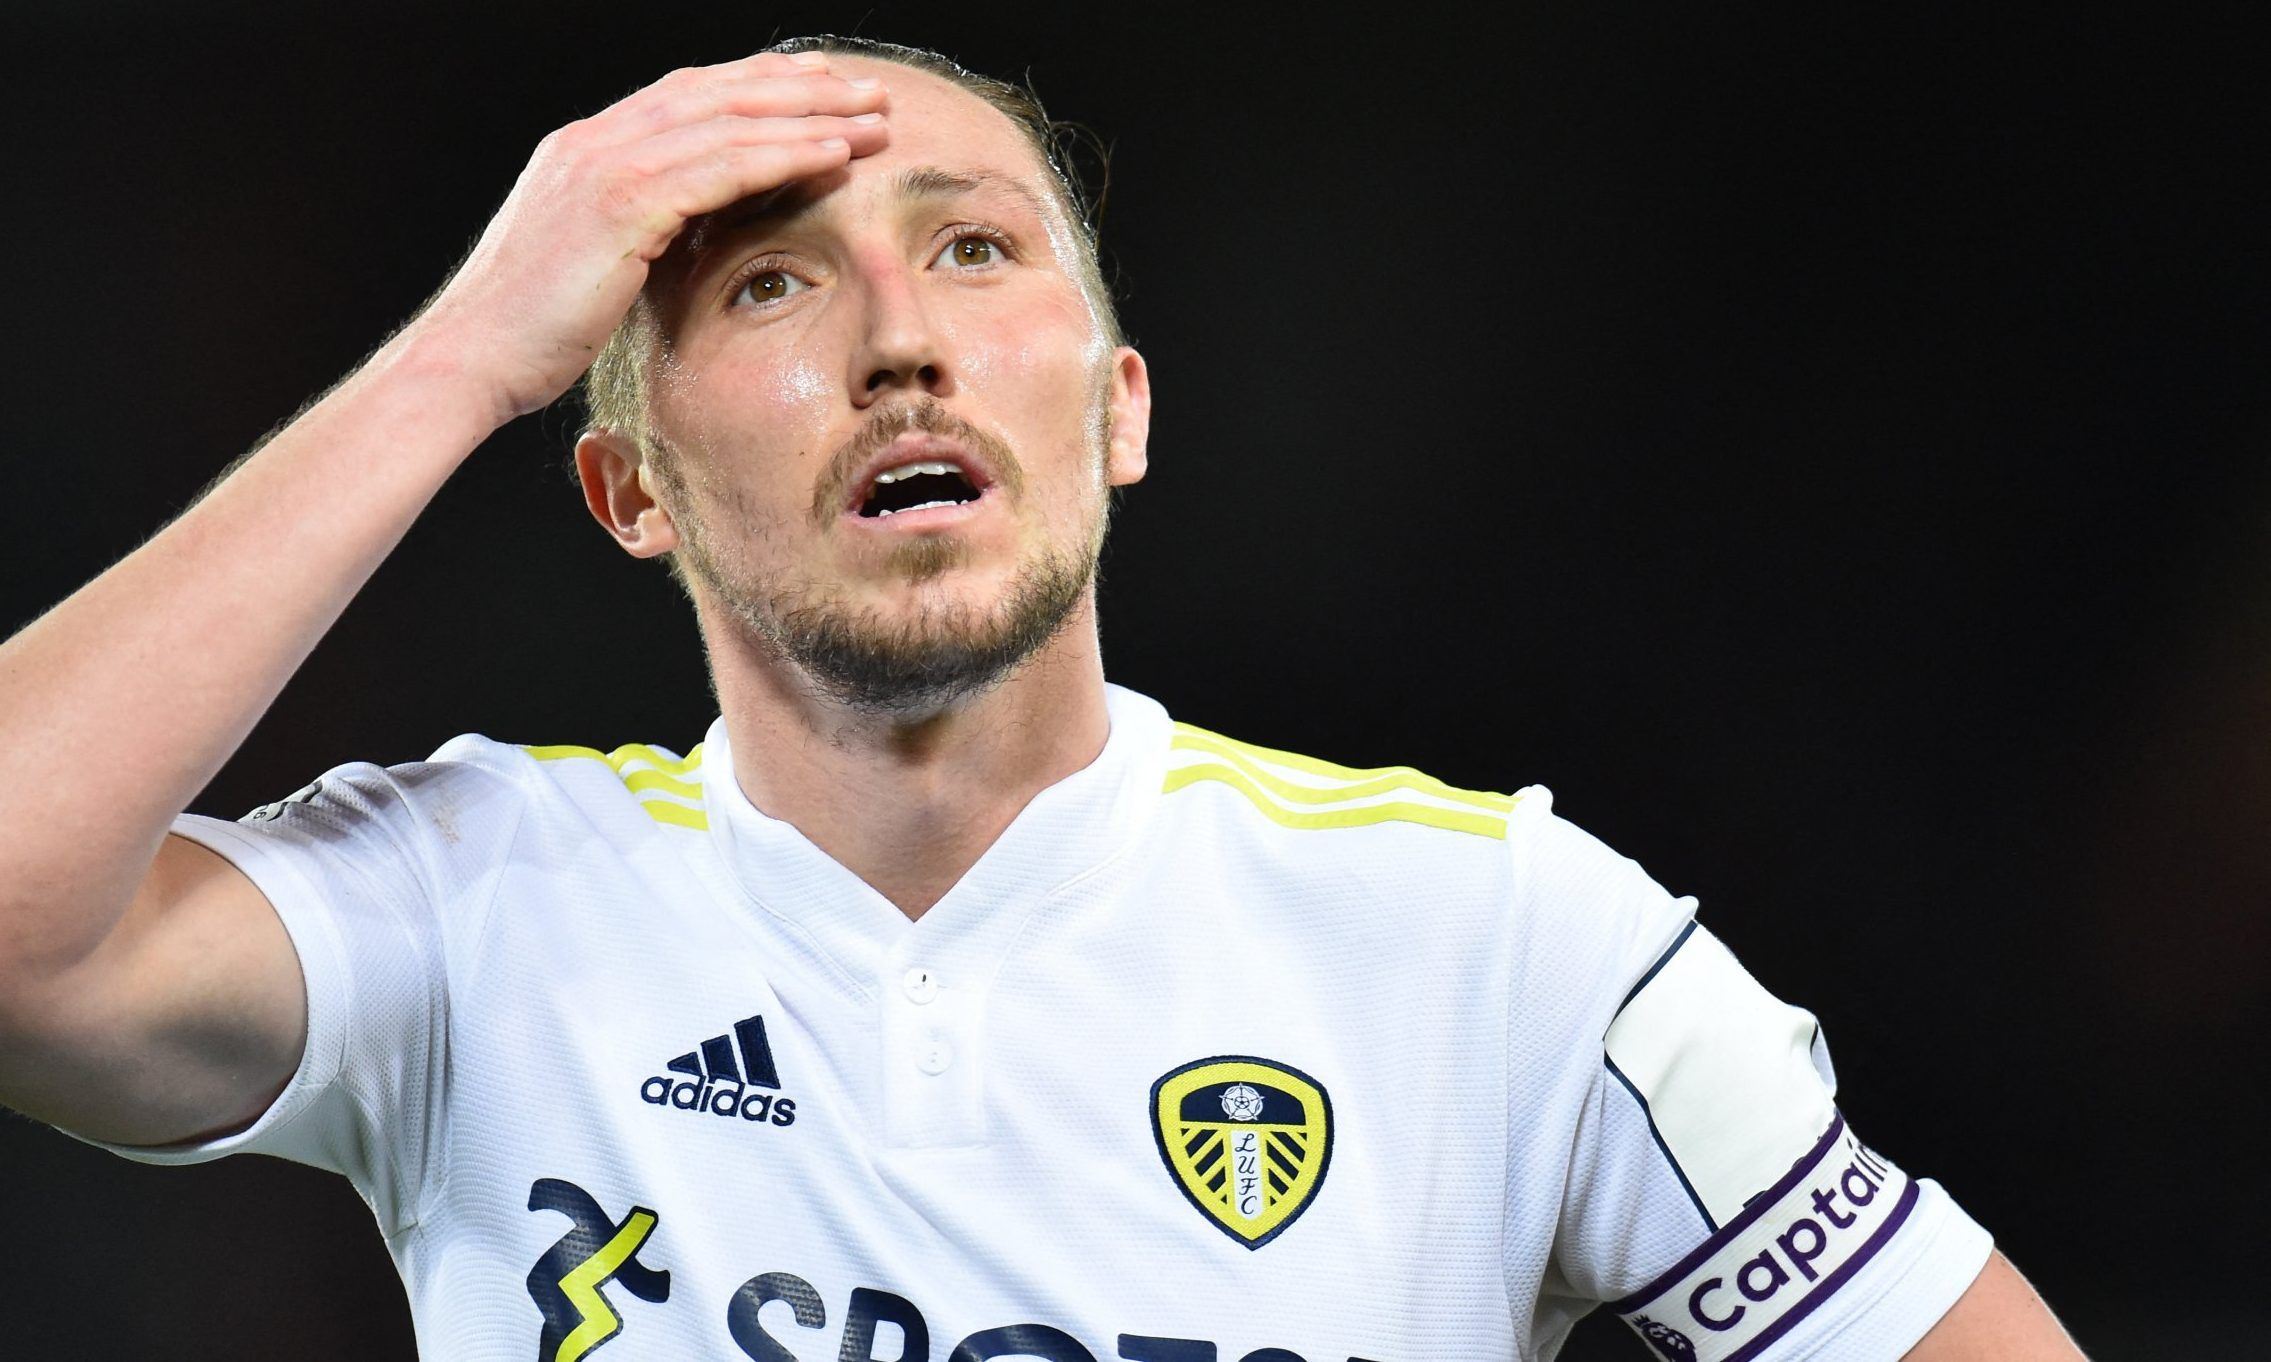 Leeds United defender Luke Ayling reacts against Liverpool after defeat